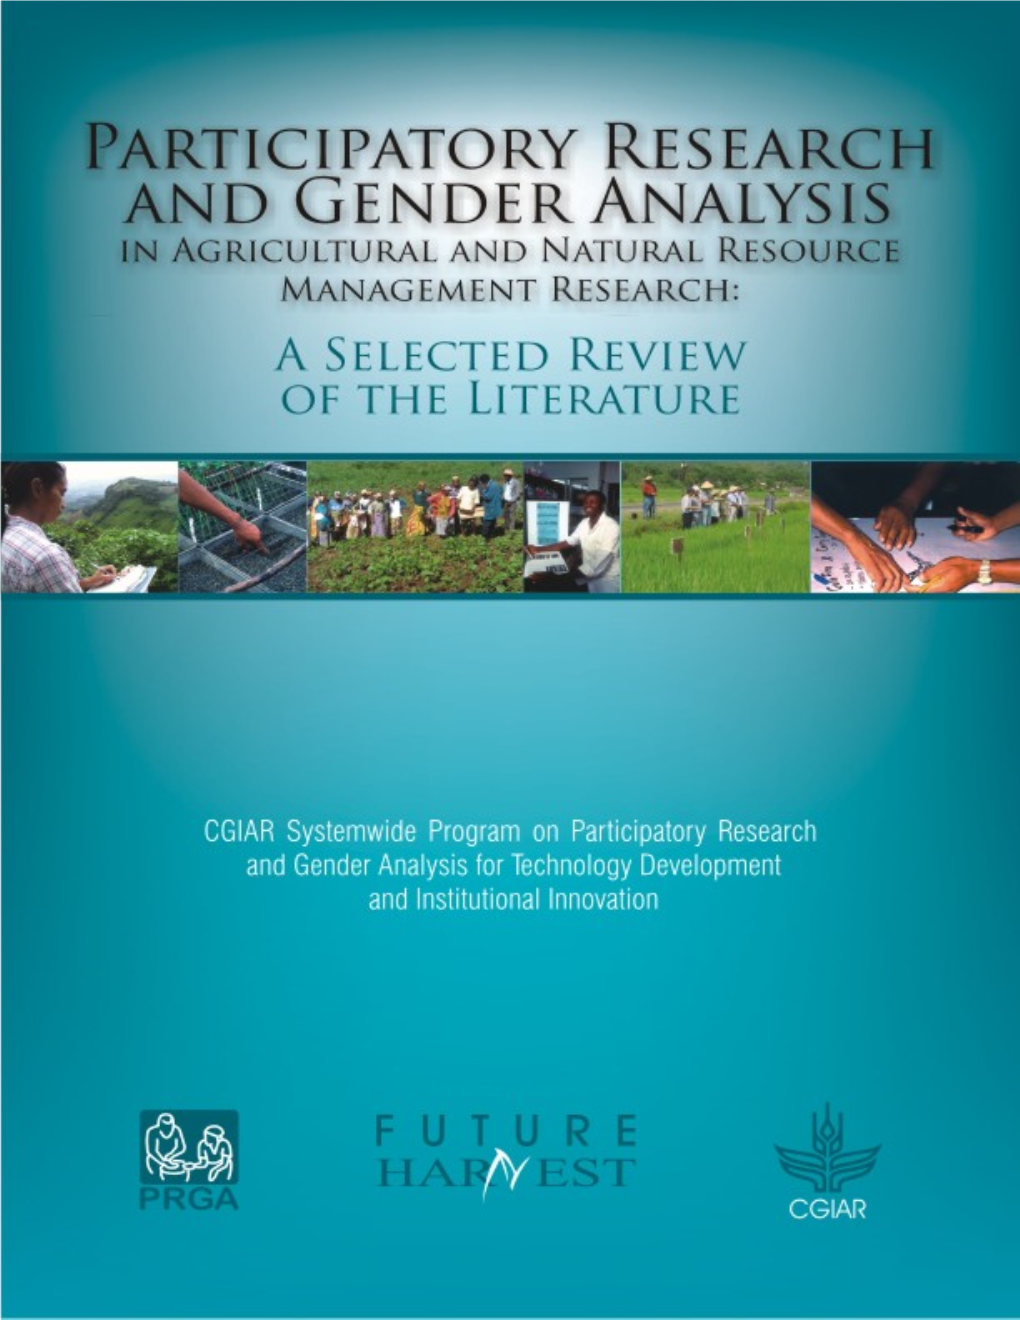 Participatory Research and Gender Analysis in Agricultural and Natural Resource Management Research